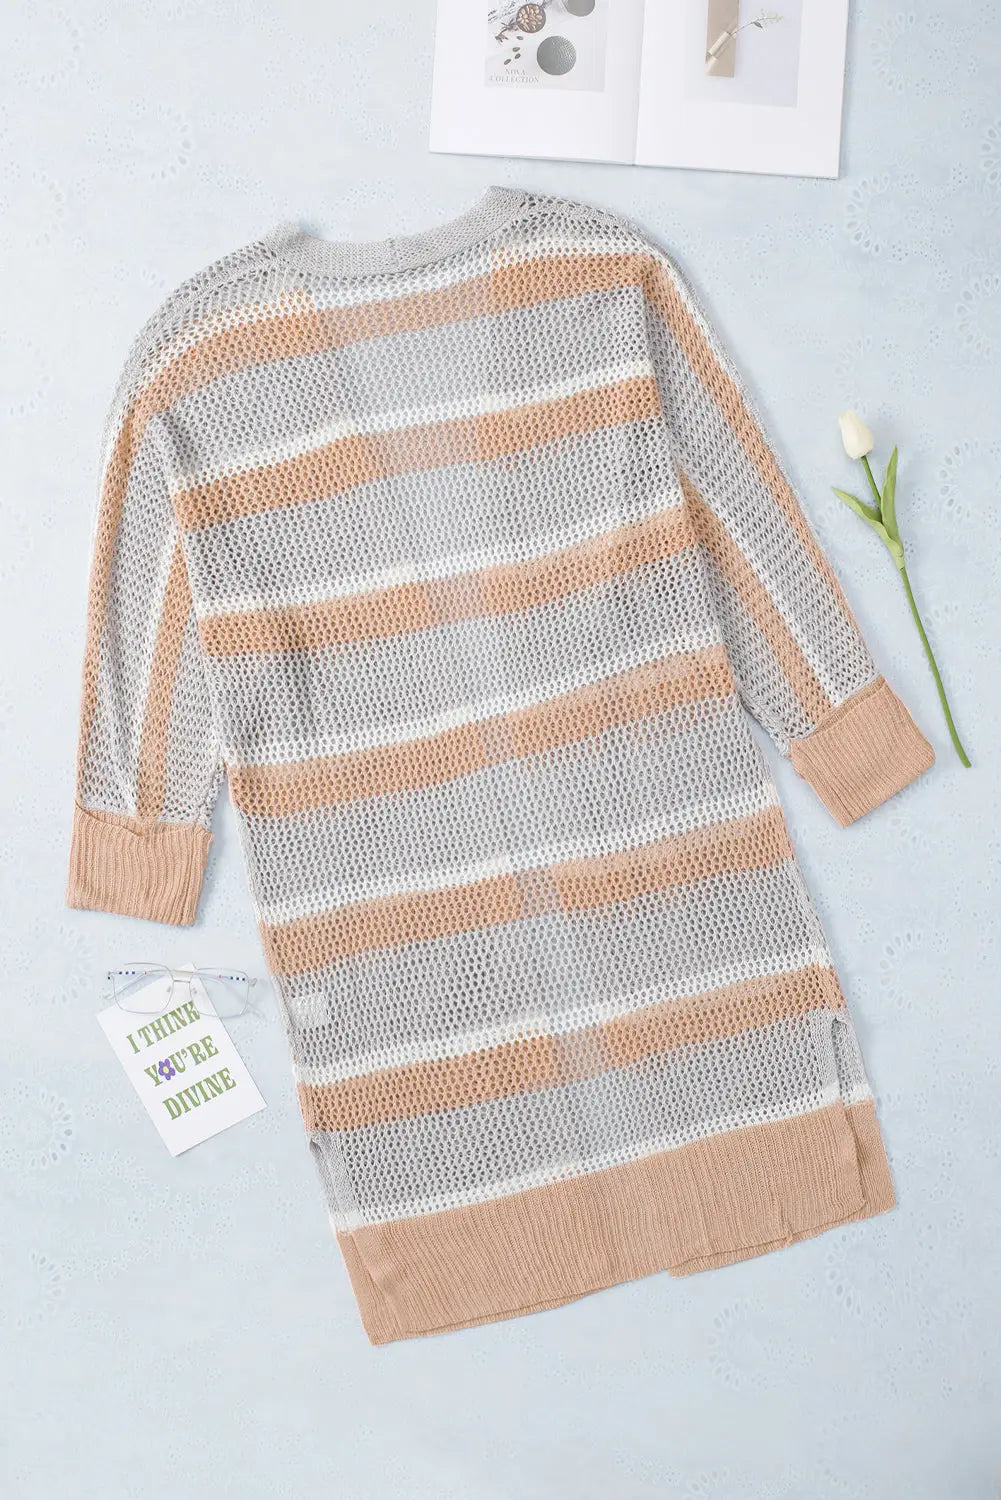 Gray days end tan open knit striped cardigan - 2xl / 100% acrylic - sweaters & cardigans